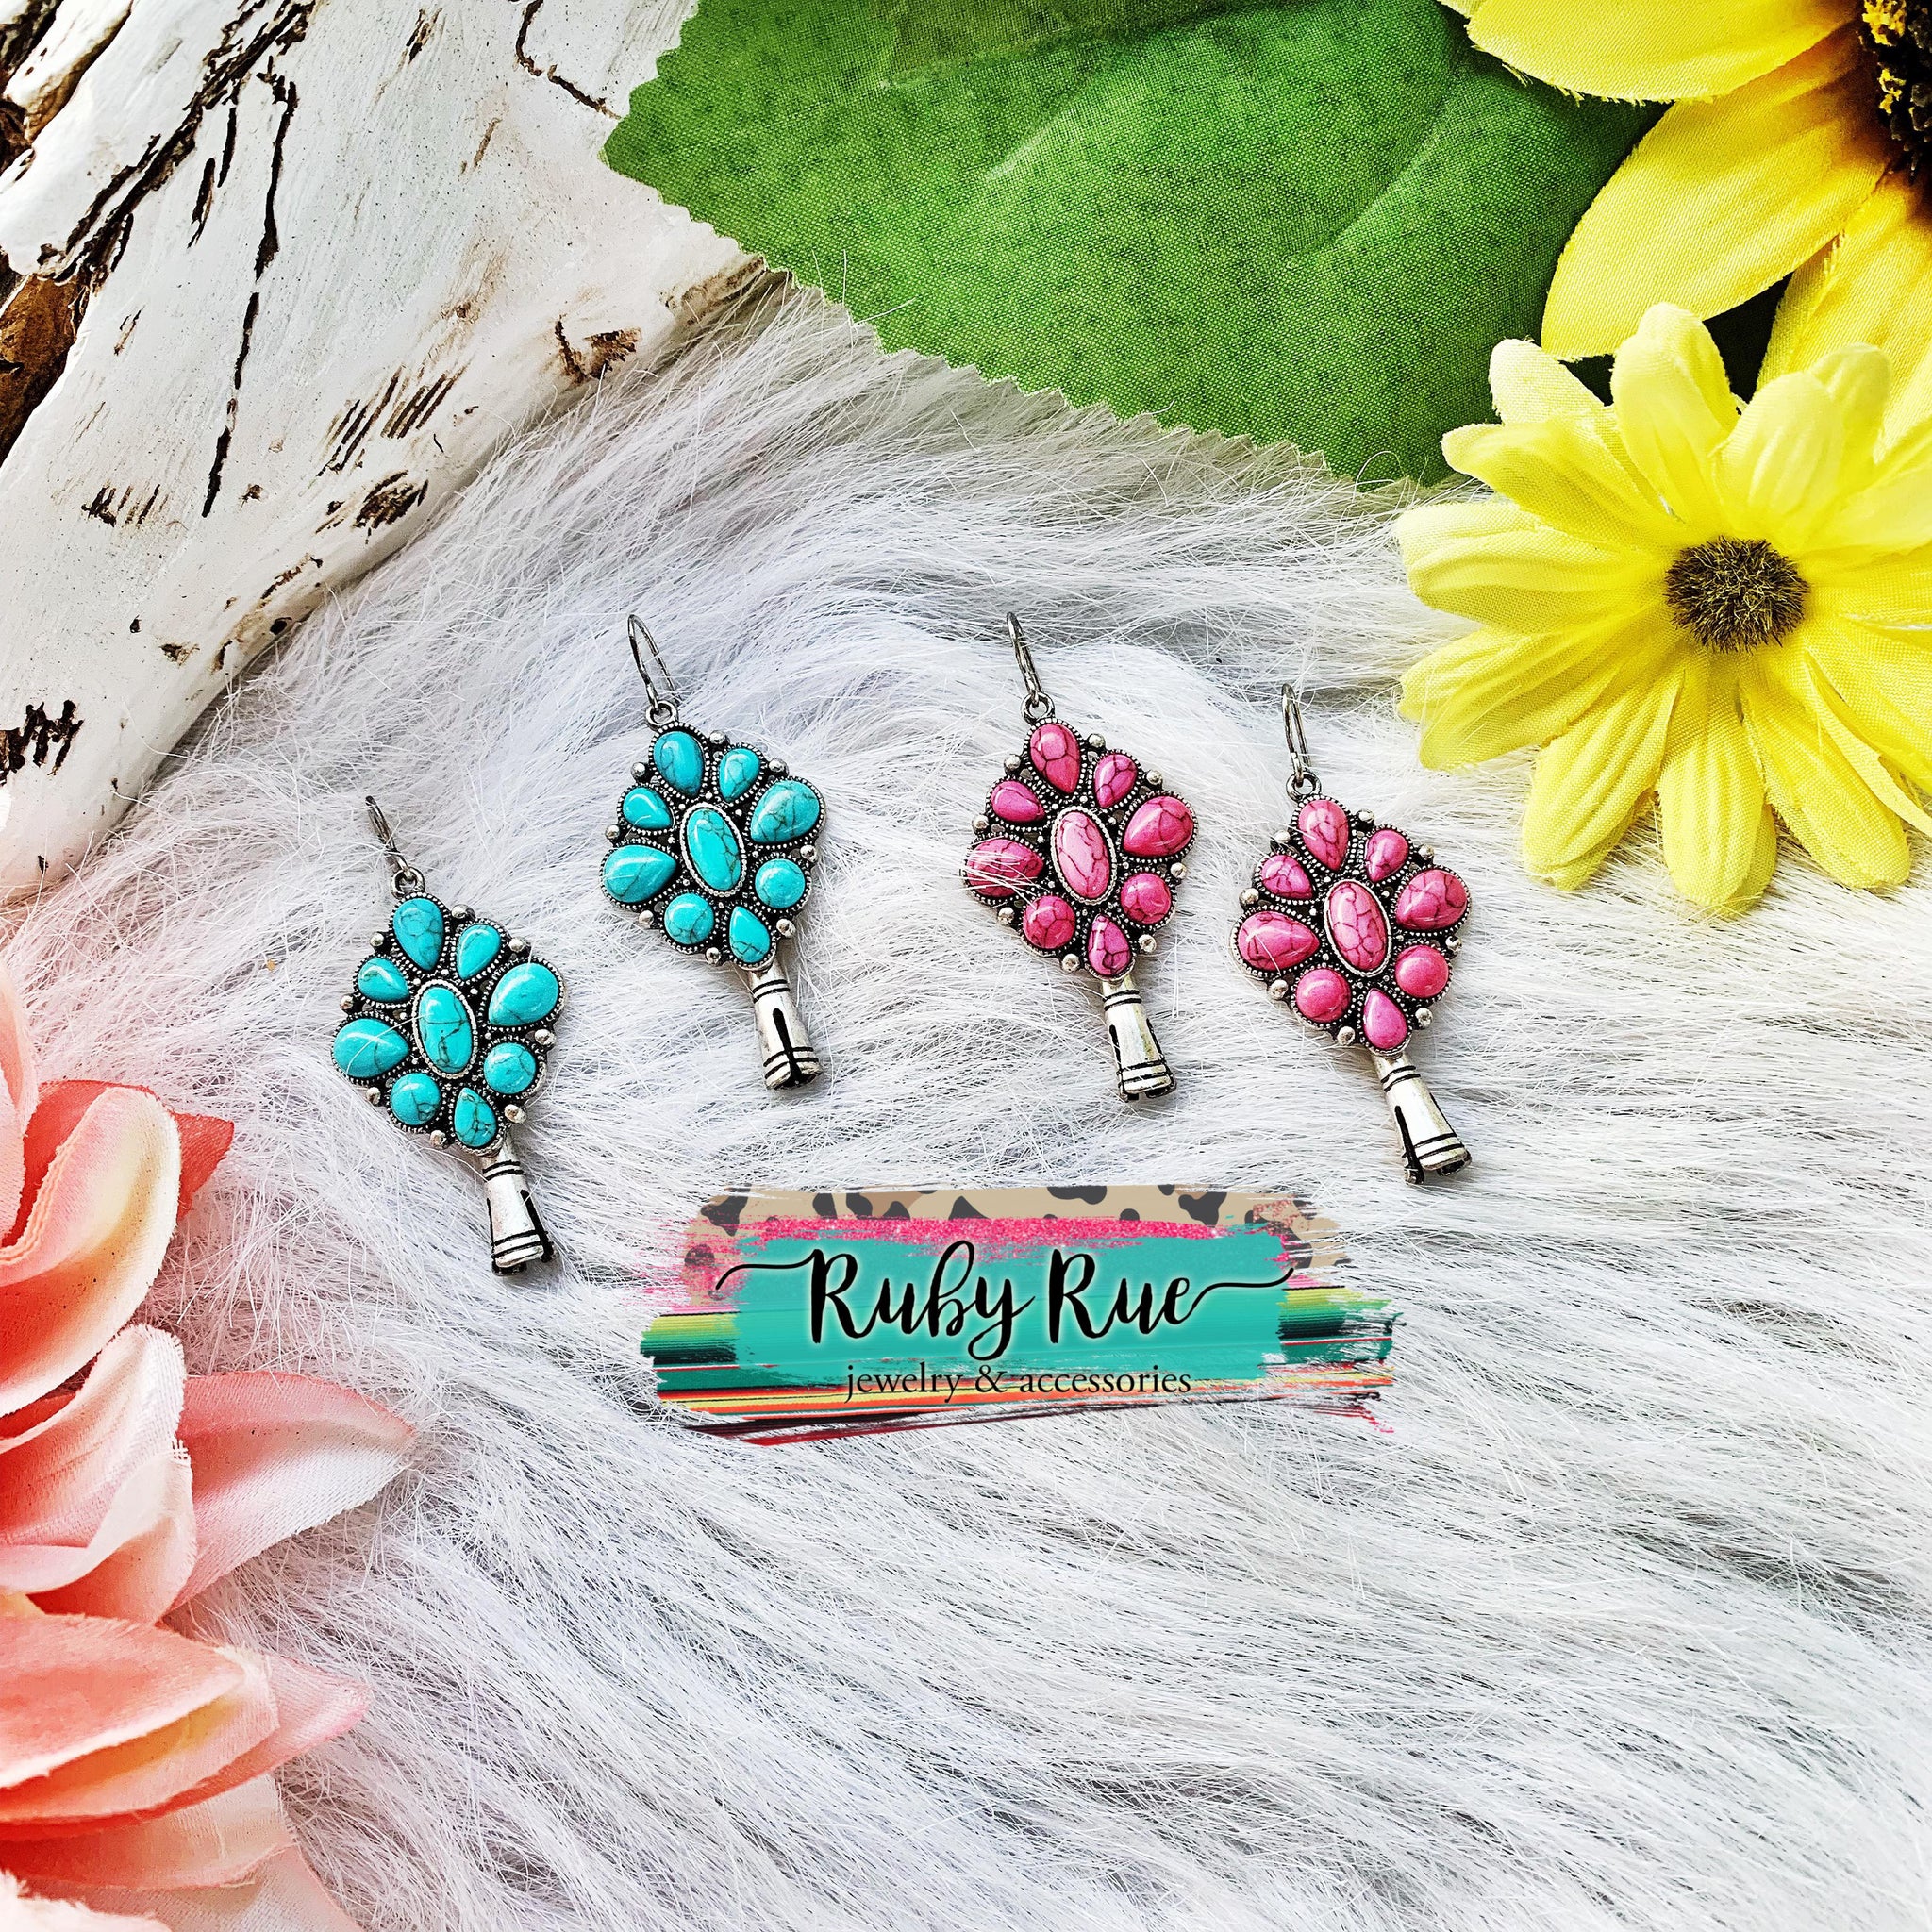 Colorful Squash Earrings - Ruby Rue Jewelry & Accessories